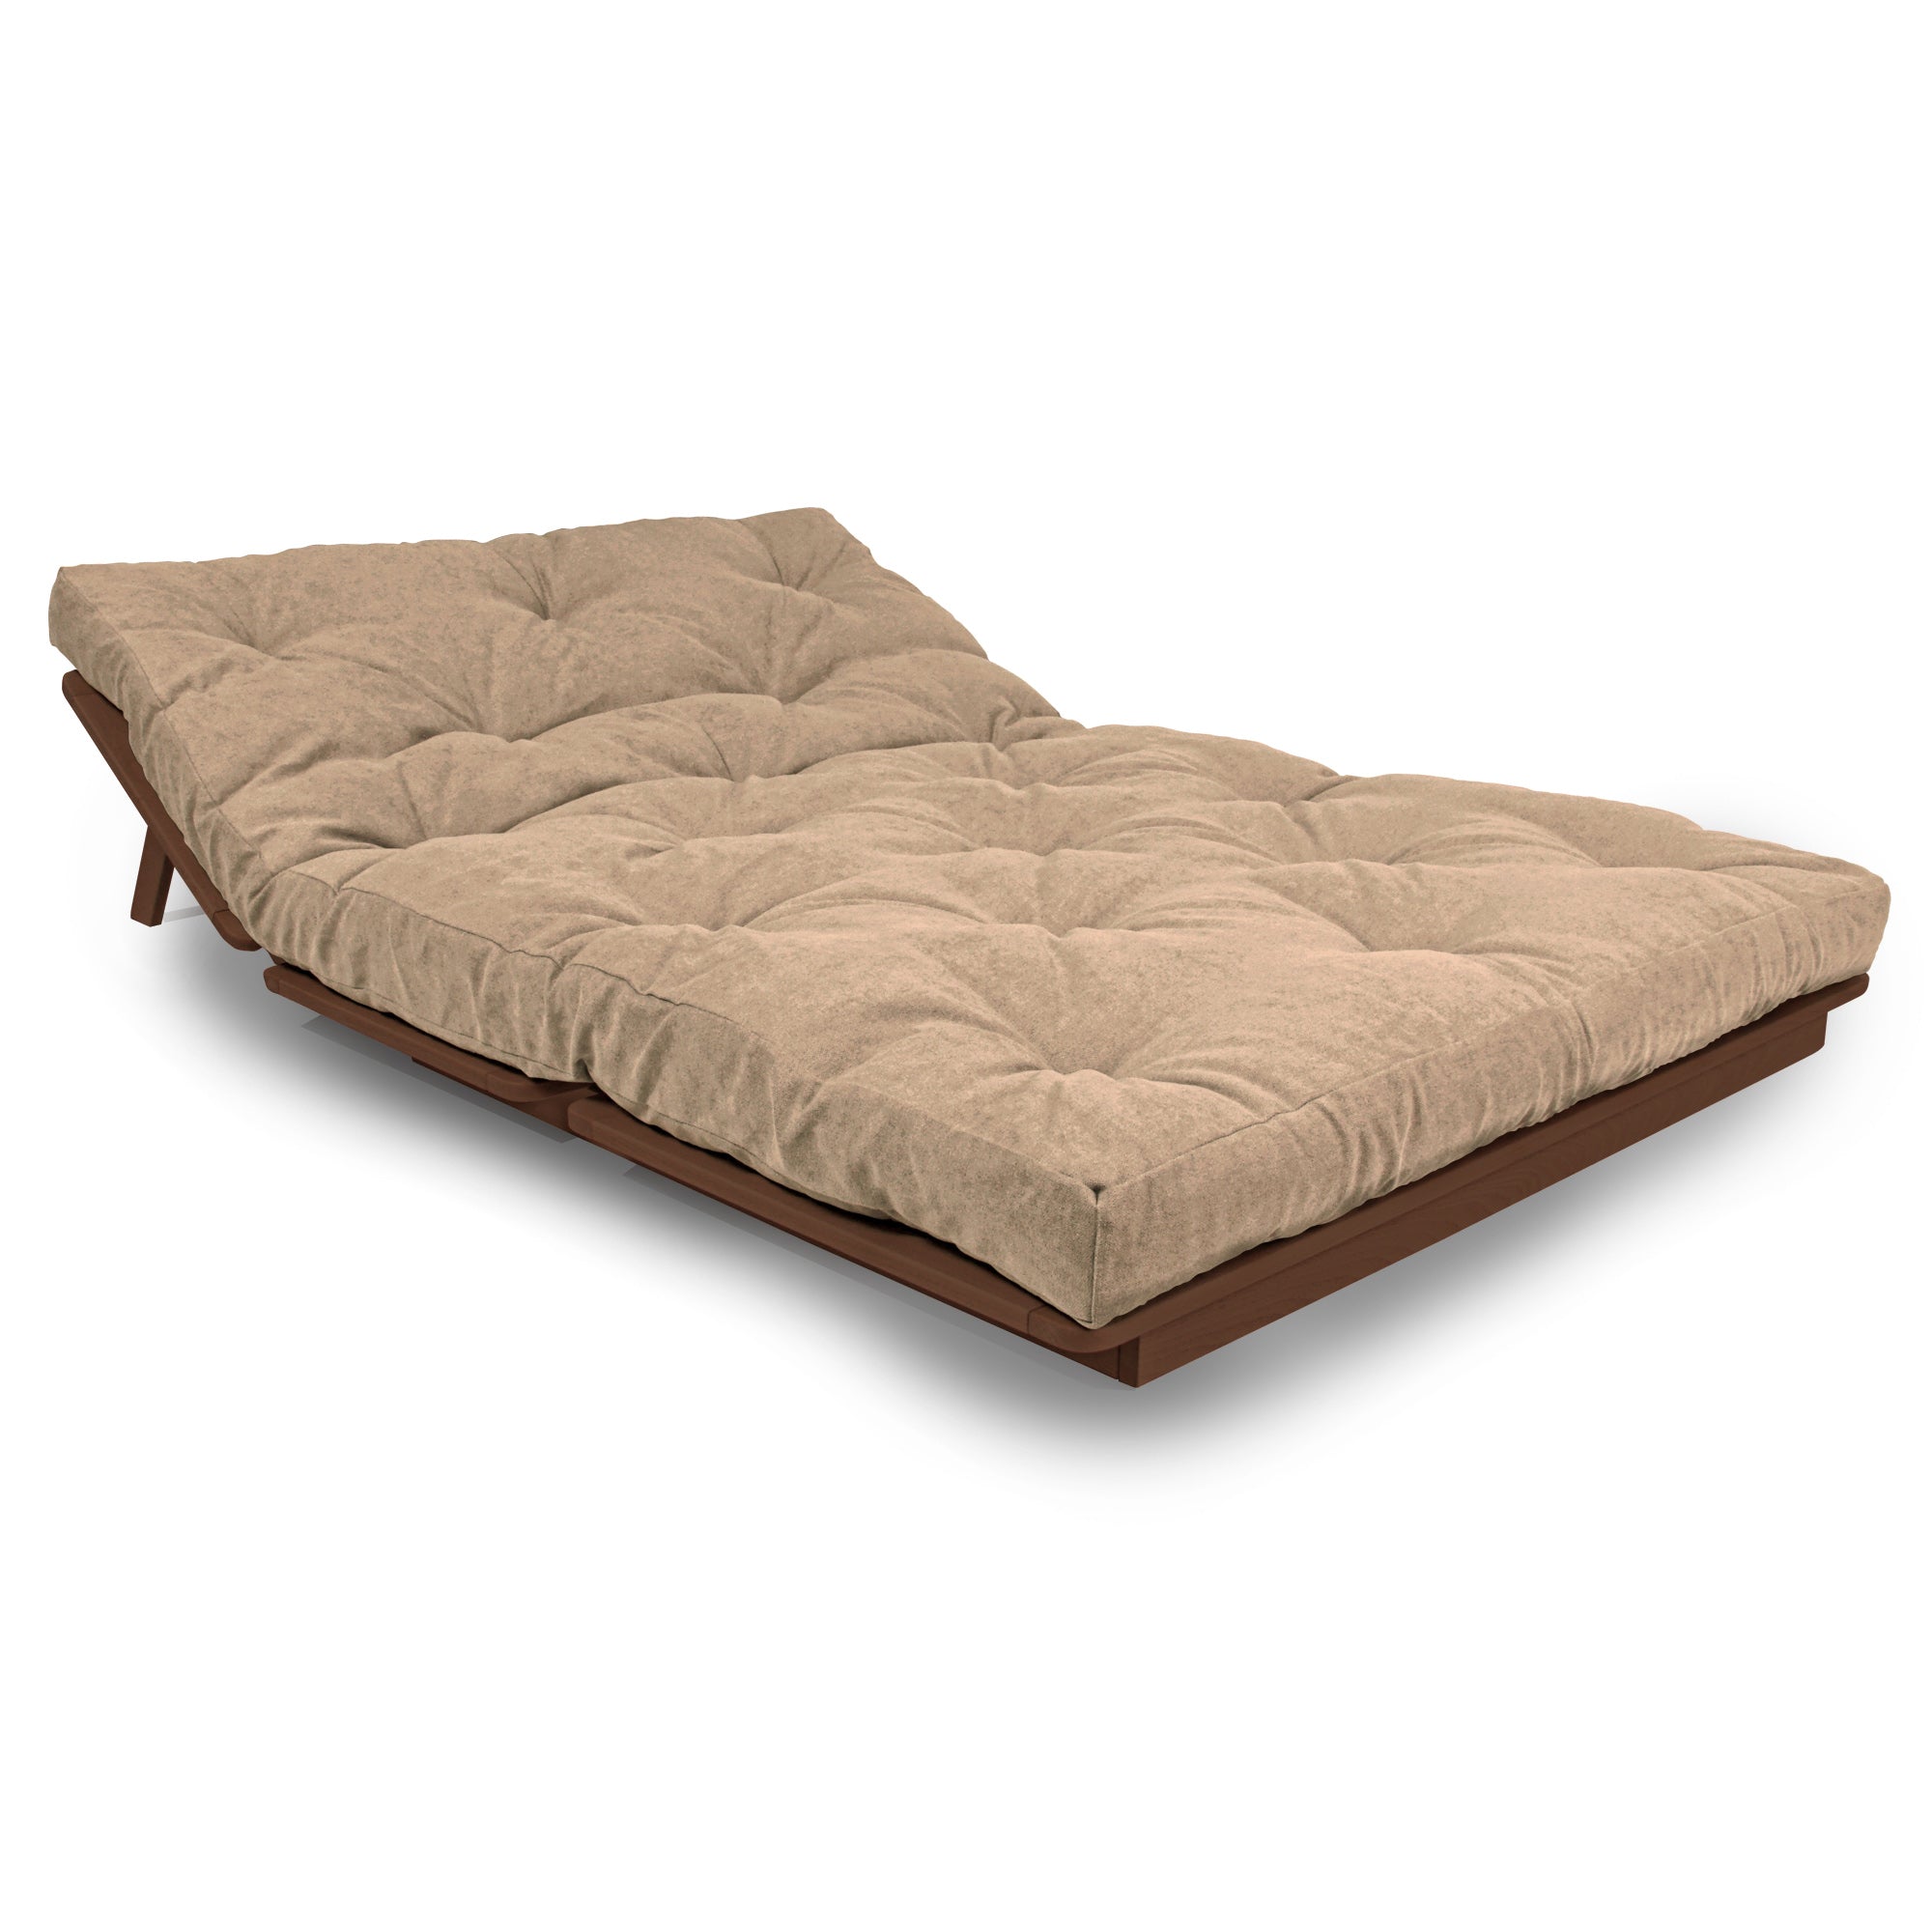 LAYTI-140 Double Futon Bed, Solid Beech Wood, Brown